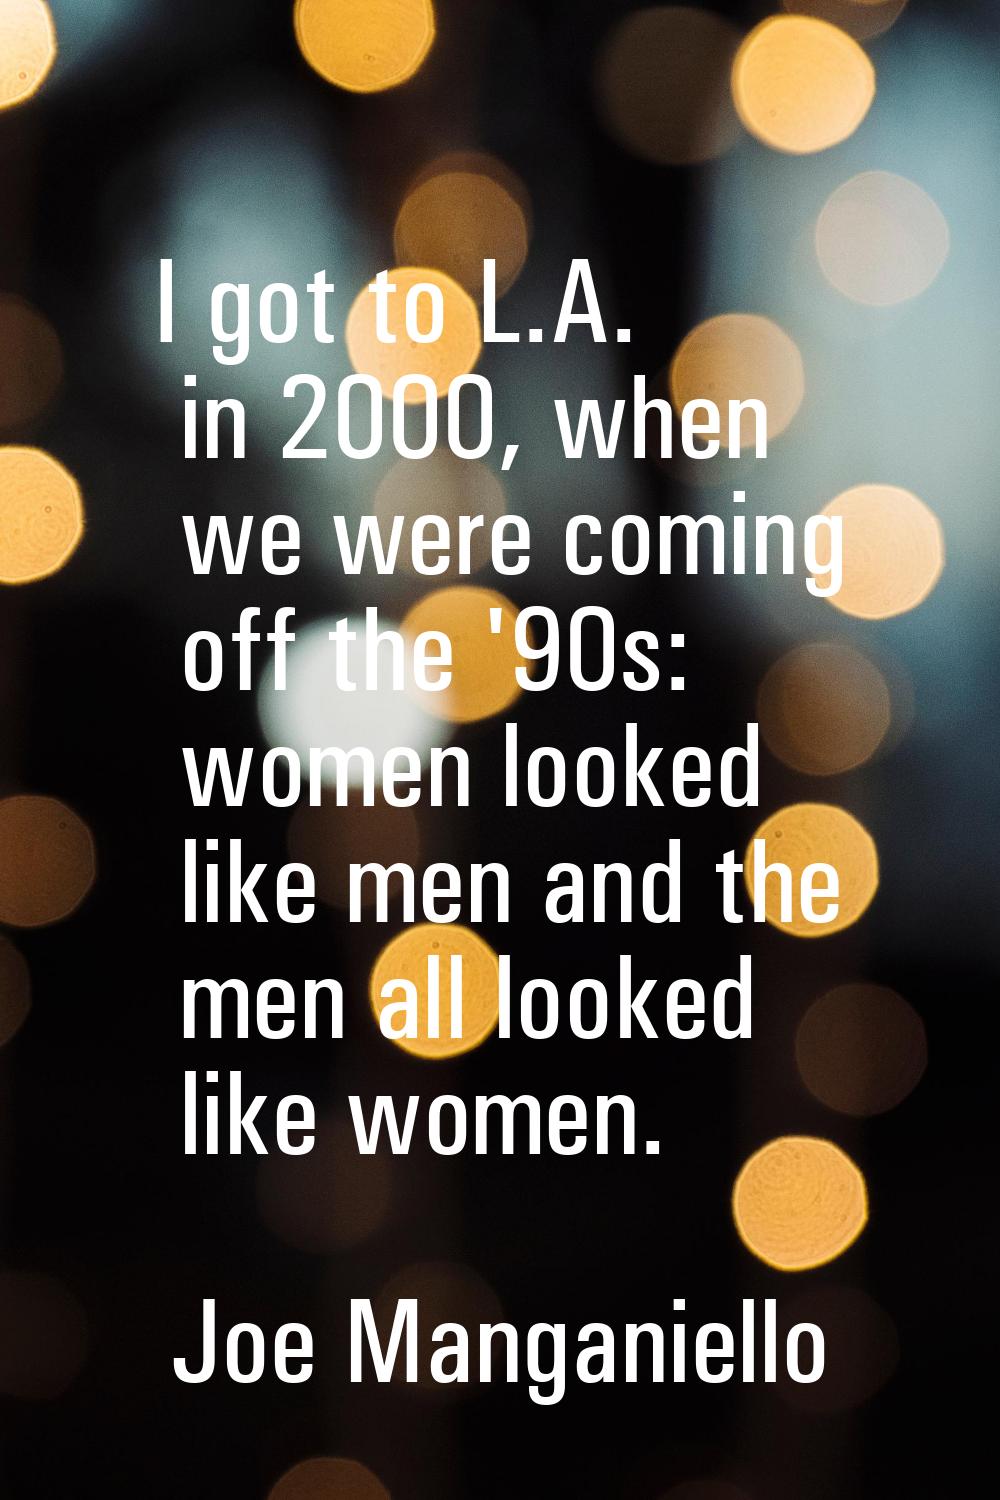 I got to L.A. in 2000, when we were coming off the '90s: women looked like men and the men all look